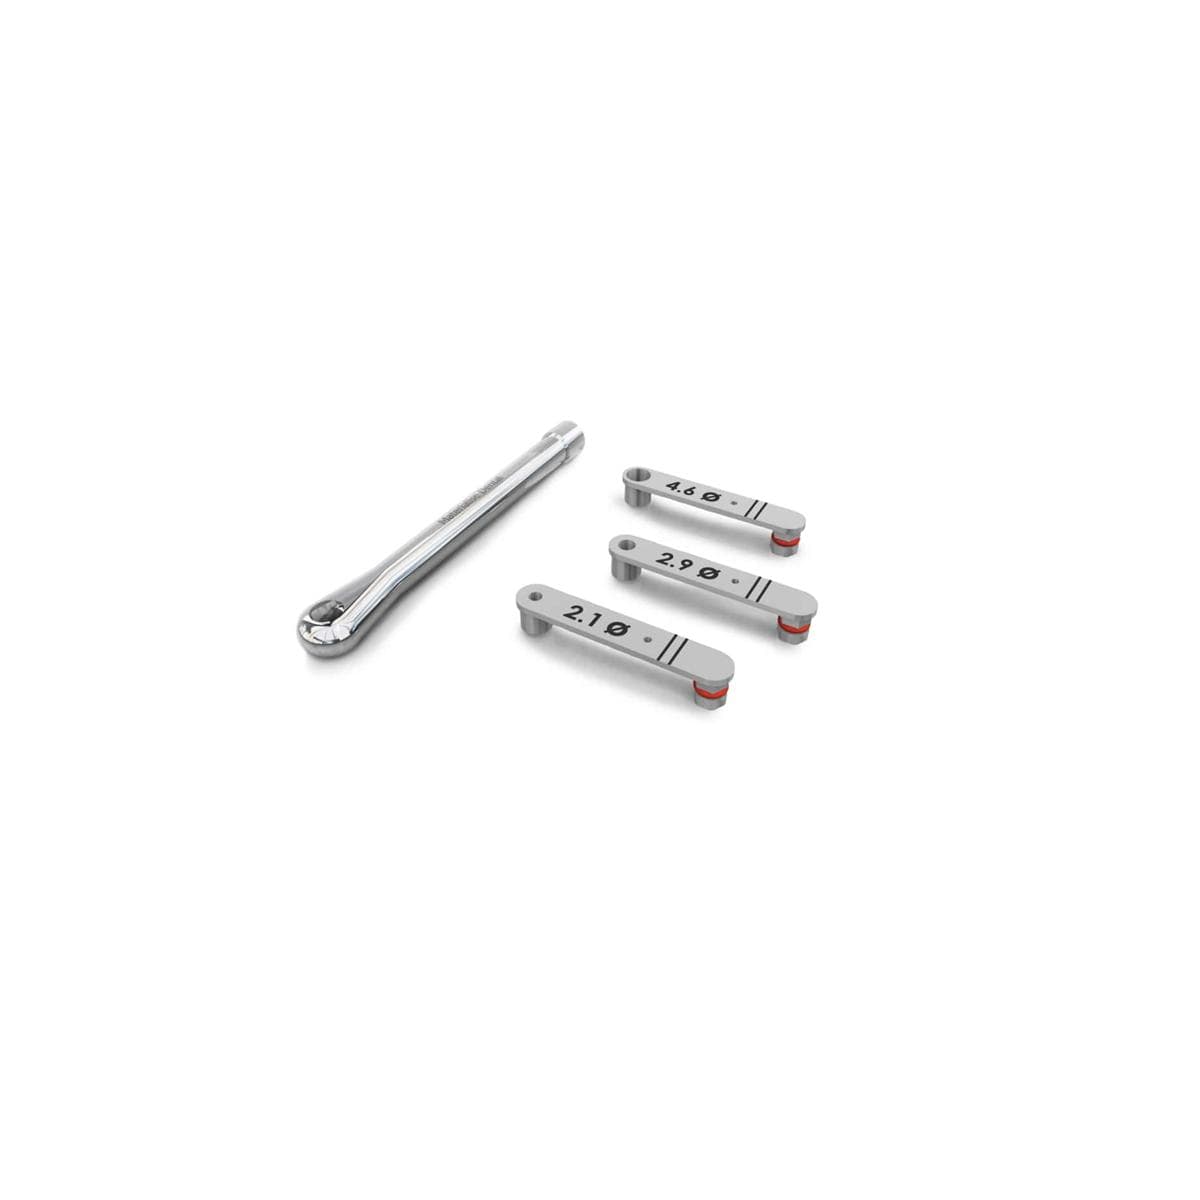 Cl de forage DENTSPLY SIRONA - Diamtre 4.5mm - Taille L